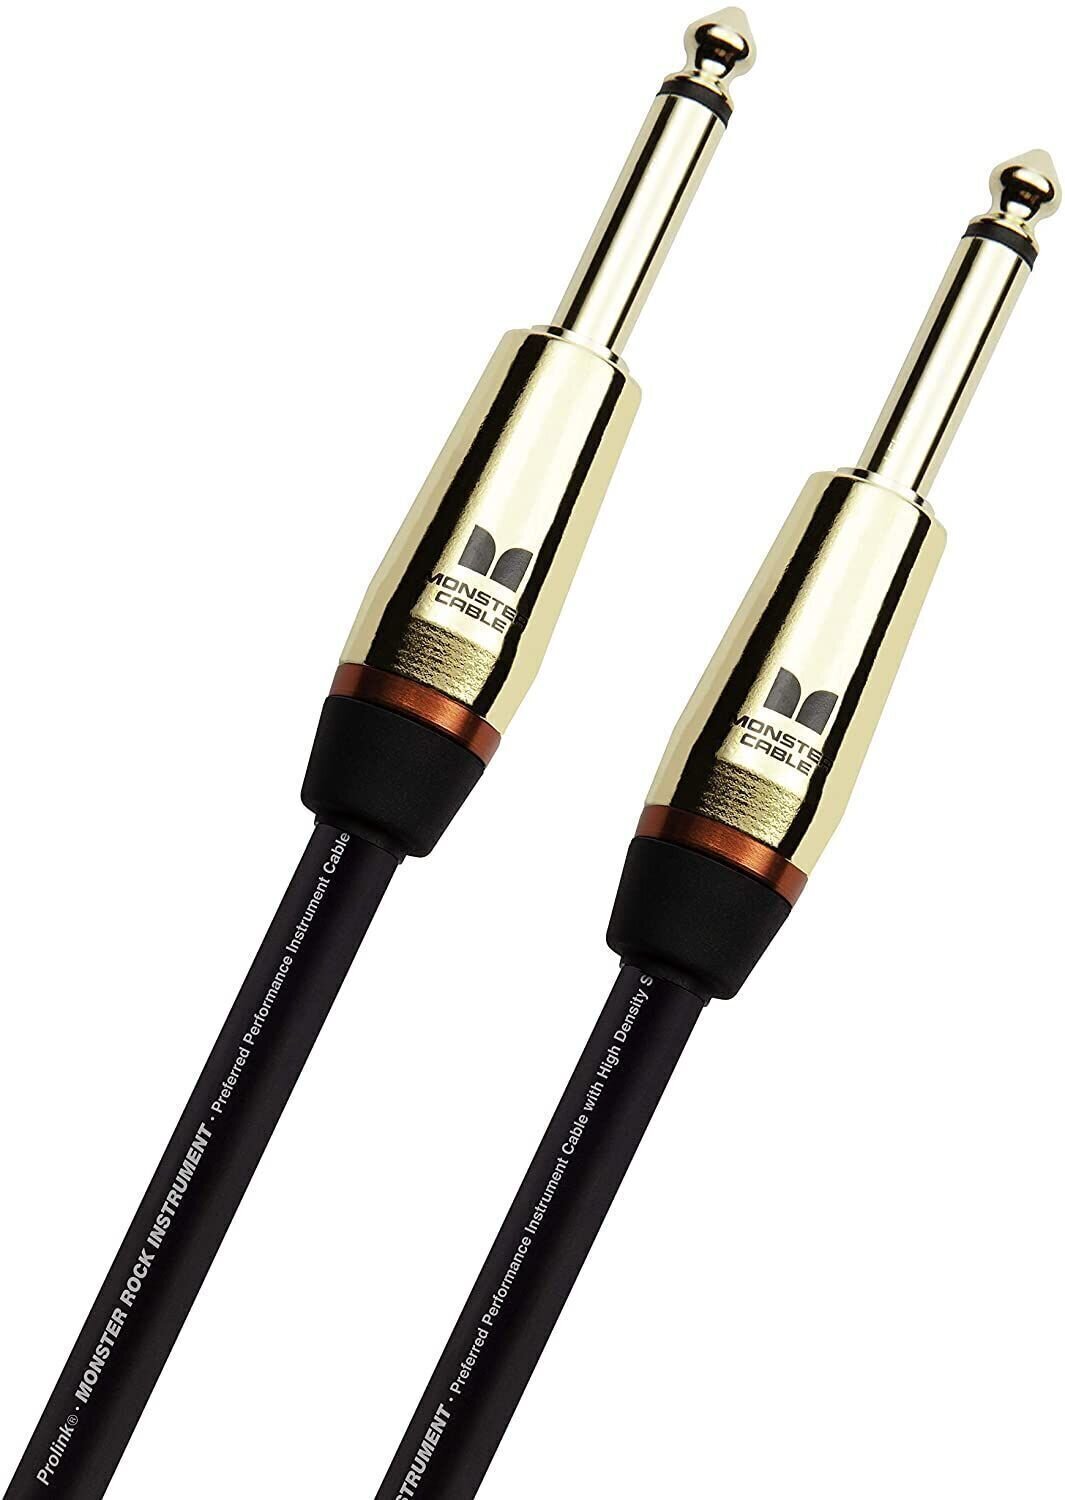 Cabo do instrumento Monster Cable Prolink Rock 12FT Instrument Cable Preto 3,6 m Reto - Reto